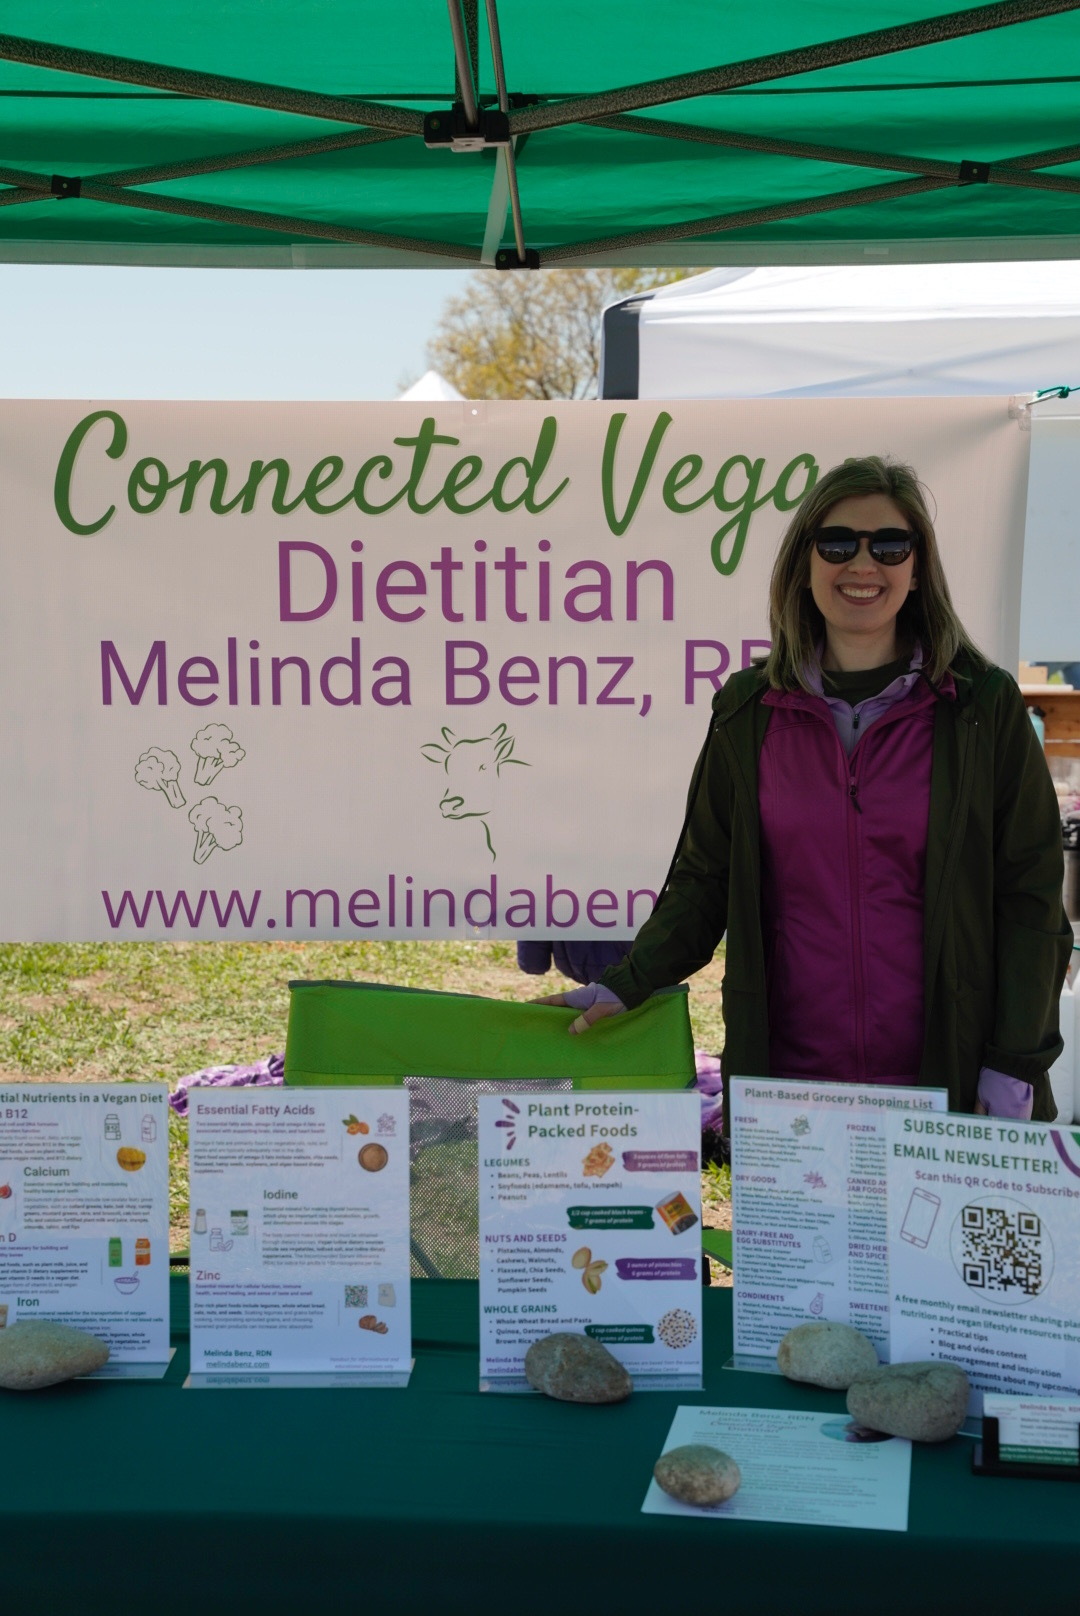 Dietitian Melinda Benz Standing at Outdoor Event Booth